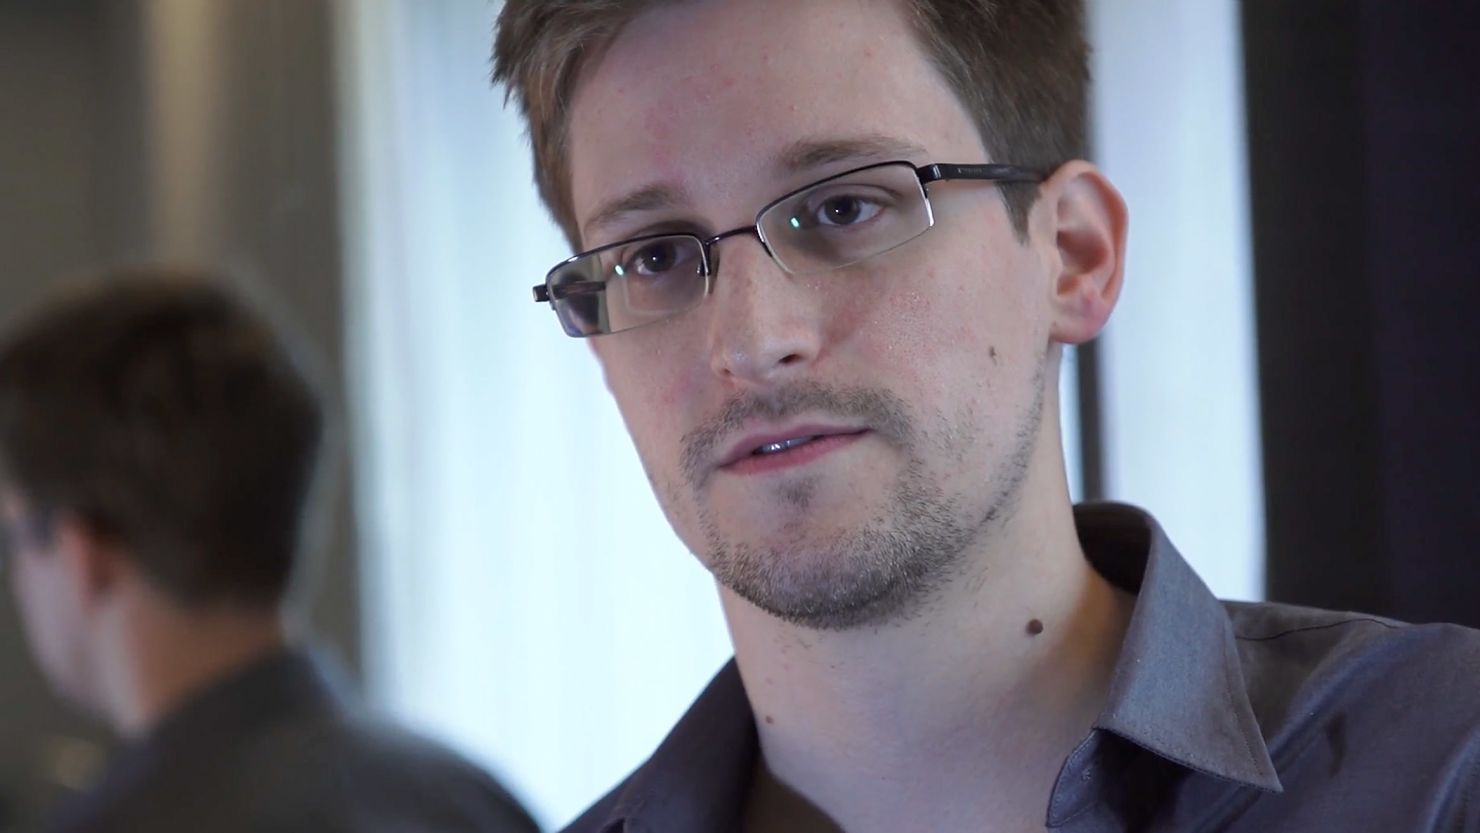 Edward Snowden has been granted temporary asylum in Russia.